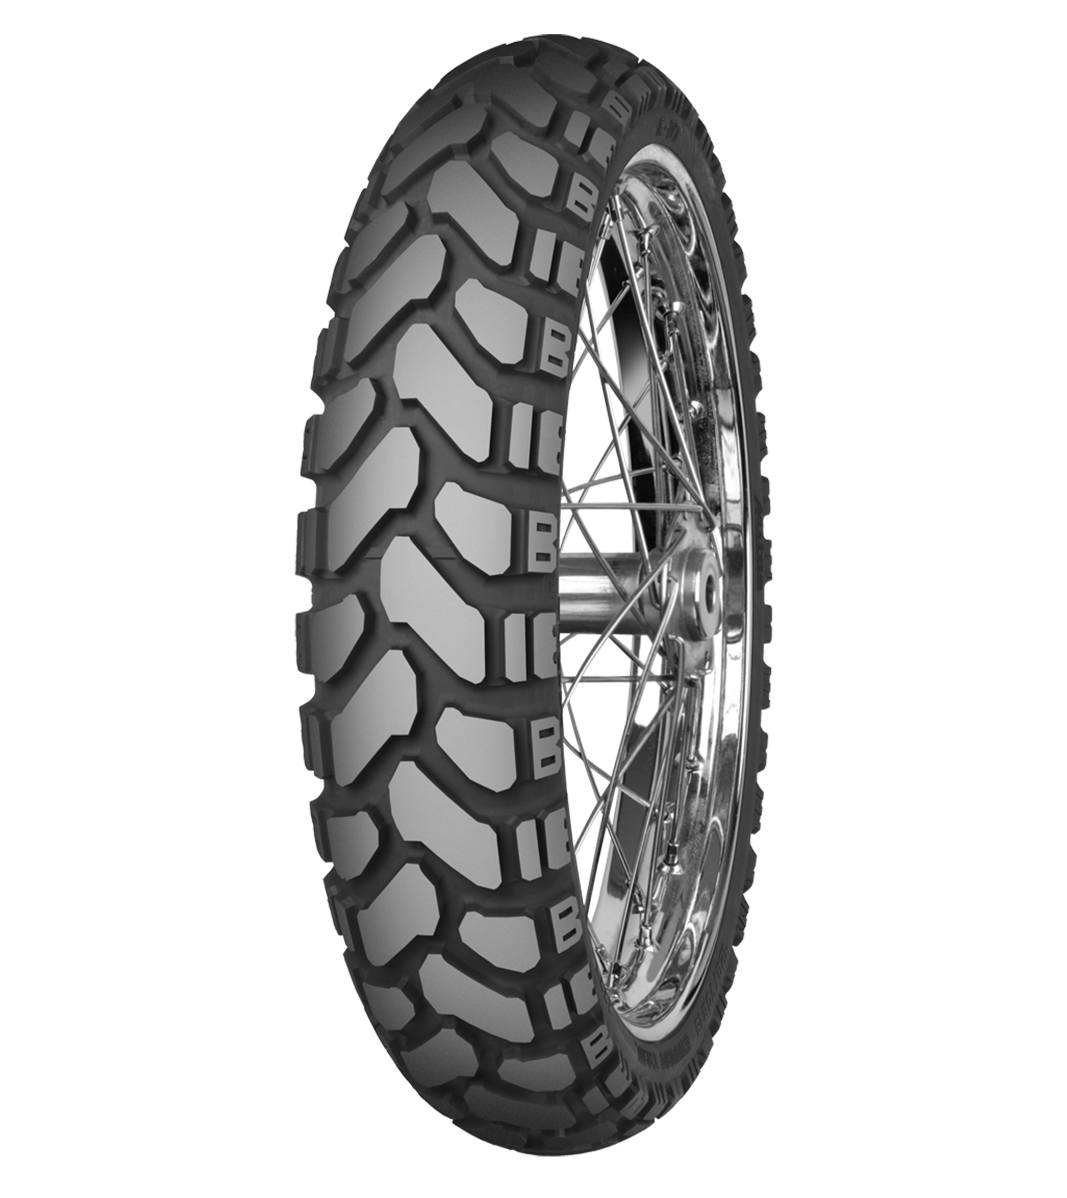 Mitas E-07+ ENDURO TRAIL 90/90B21 Trail ON Trail 54T No Stripe Tubeless Front Tire, 224654, 90/90B21, Adventure Touring, E Series, E-07+ Enduro Trail, Front, Trail, Trail ON, Tires - Imported and distributed in North & South America by Lindeco Genuine Powersports - Premier Powersports Equipment and Accessories for Motorcycle Enthusiasts, Professional Riders and Dealers.